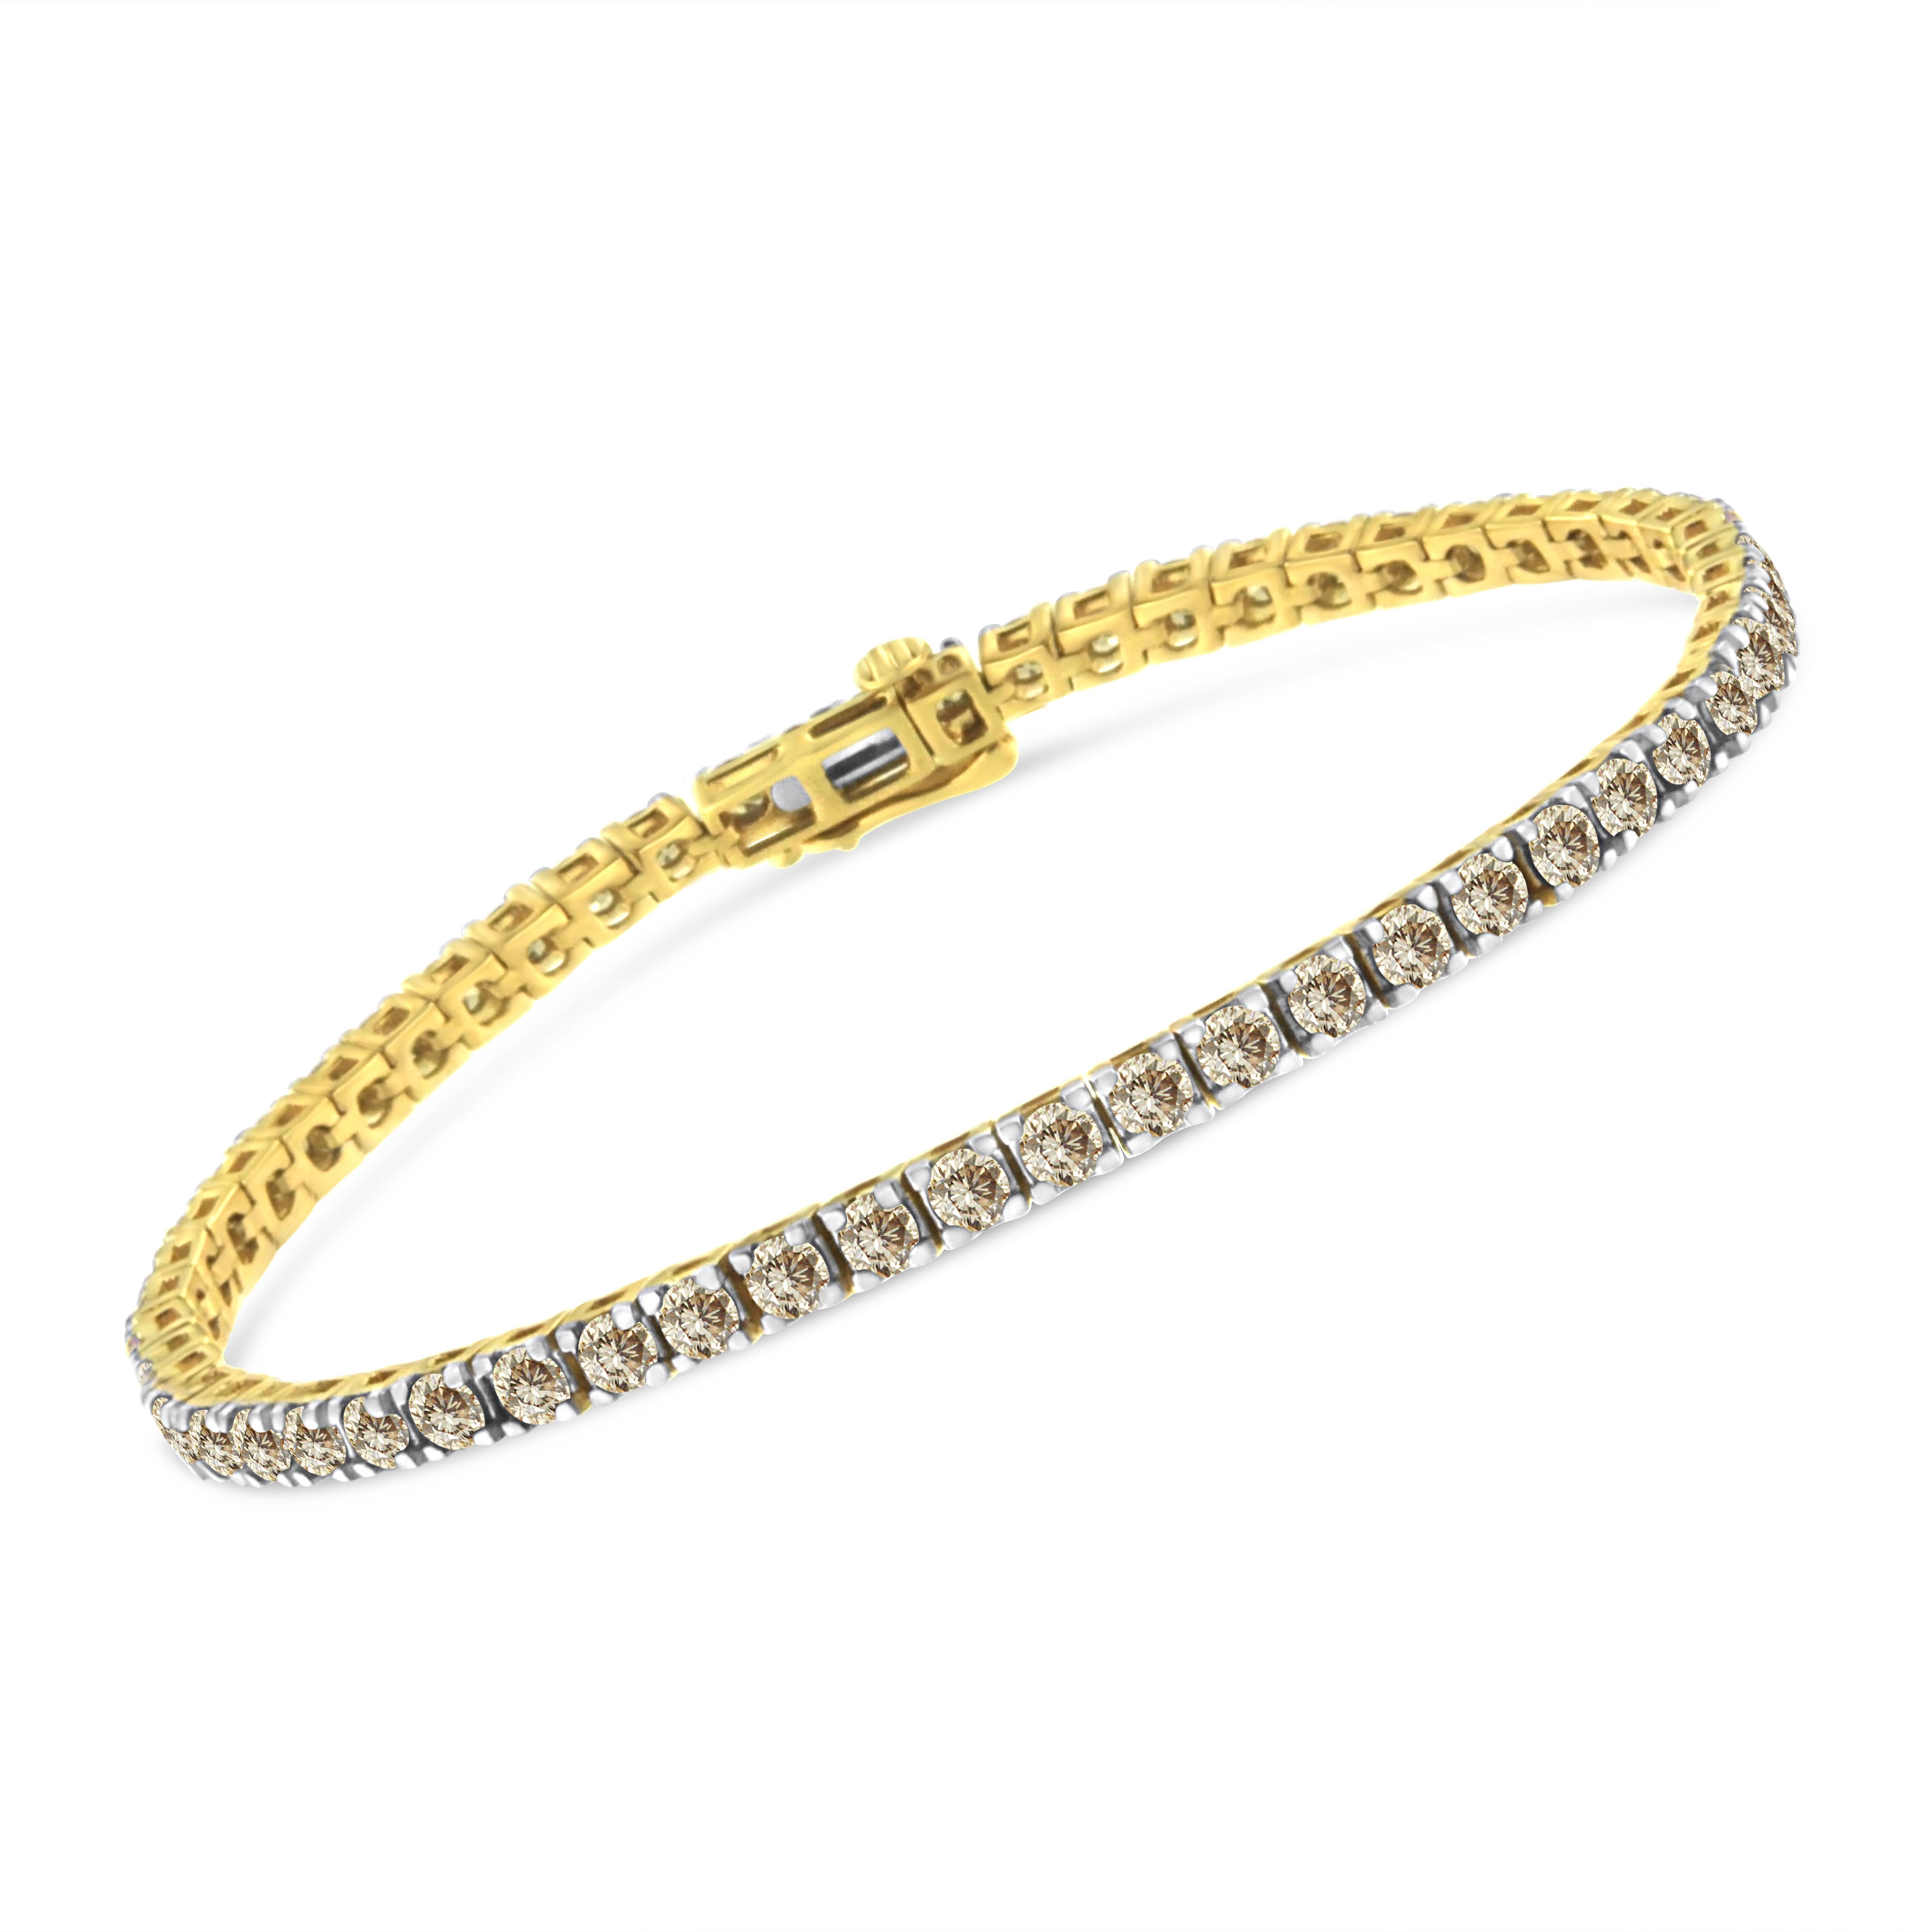 This tennis bracelet has a classic and timeless design. Fashioned in 14k yellow gold plated sterling silver, this design features 5ct TDW of glimmering round cut diamonds. 55 prong set diamonds make up this piece that secures with a box with clasp